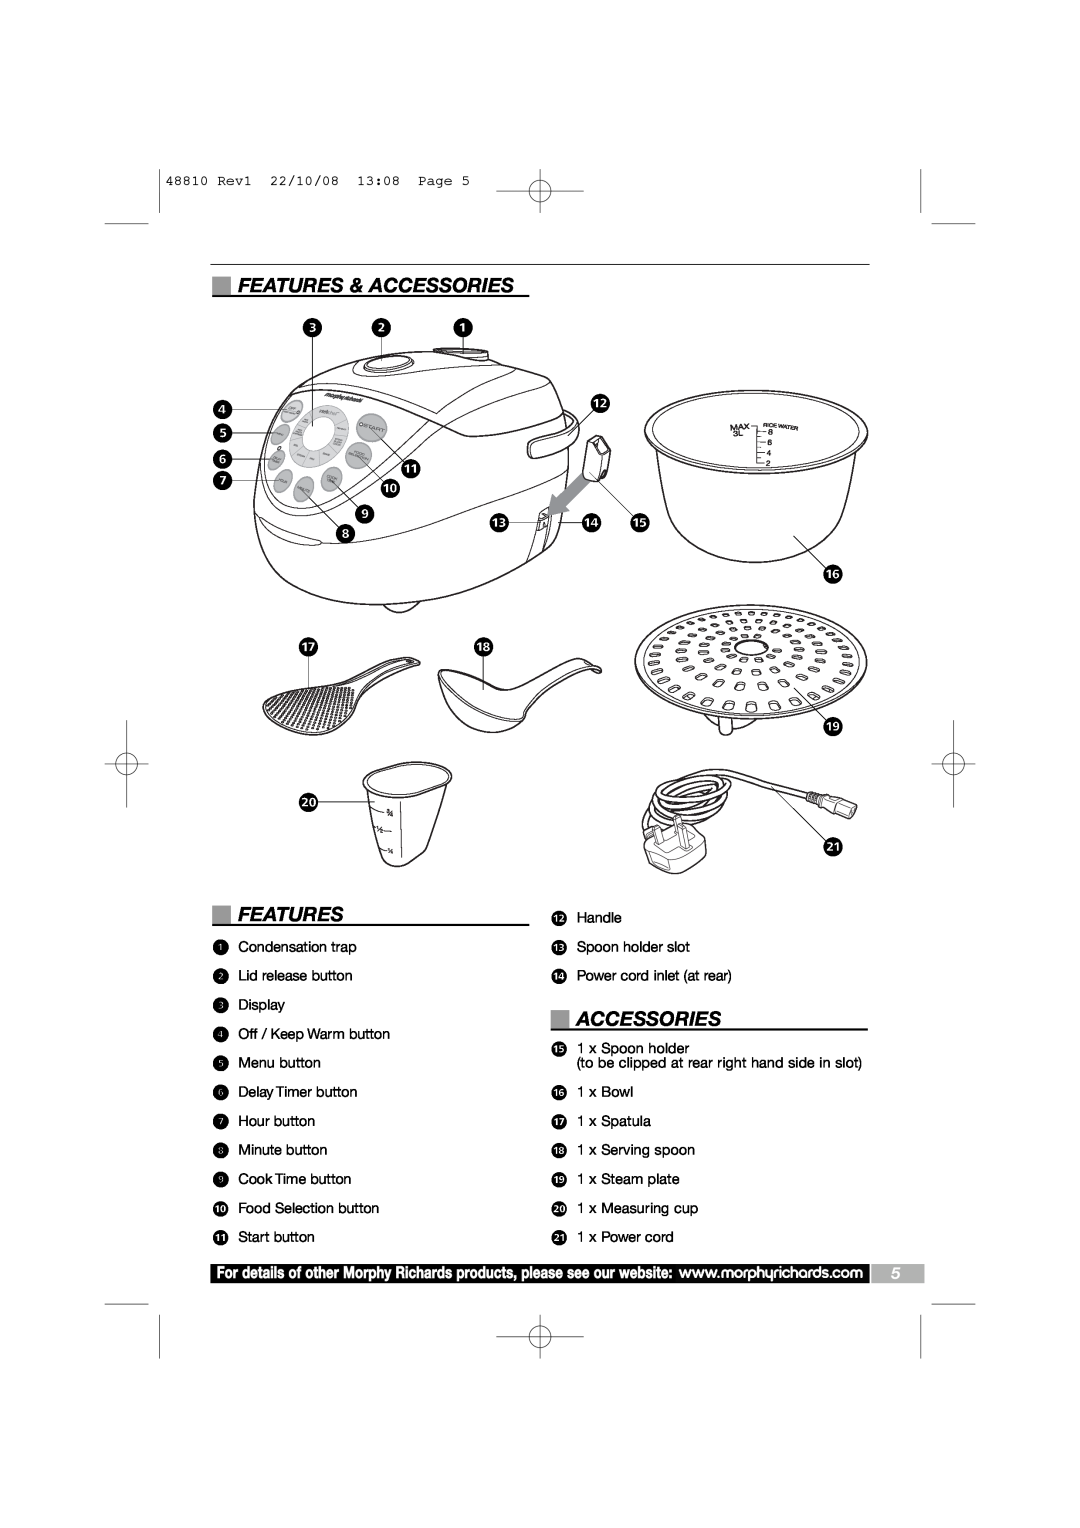 Morphy Richards Intellichef manual Features & Accessories 